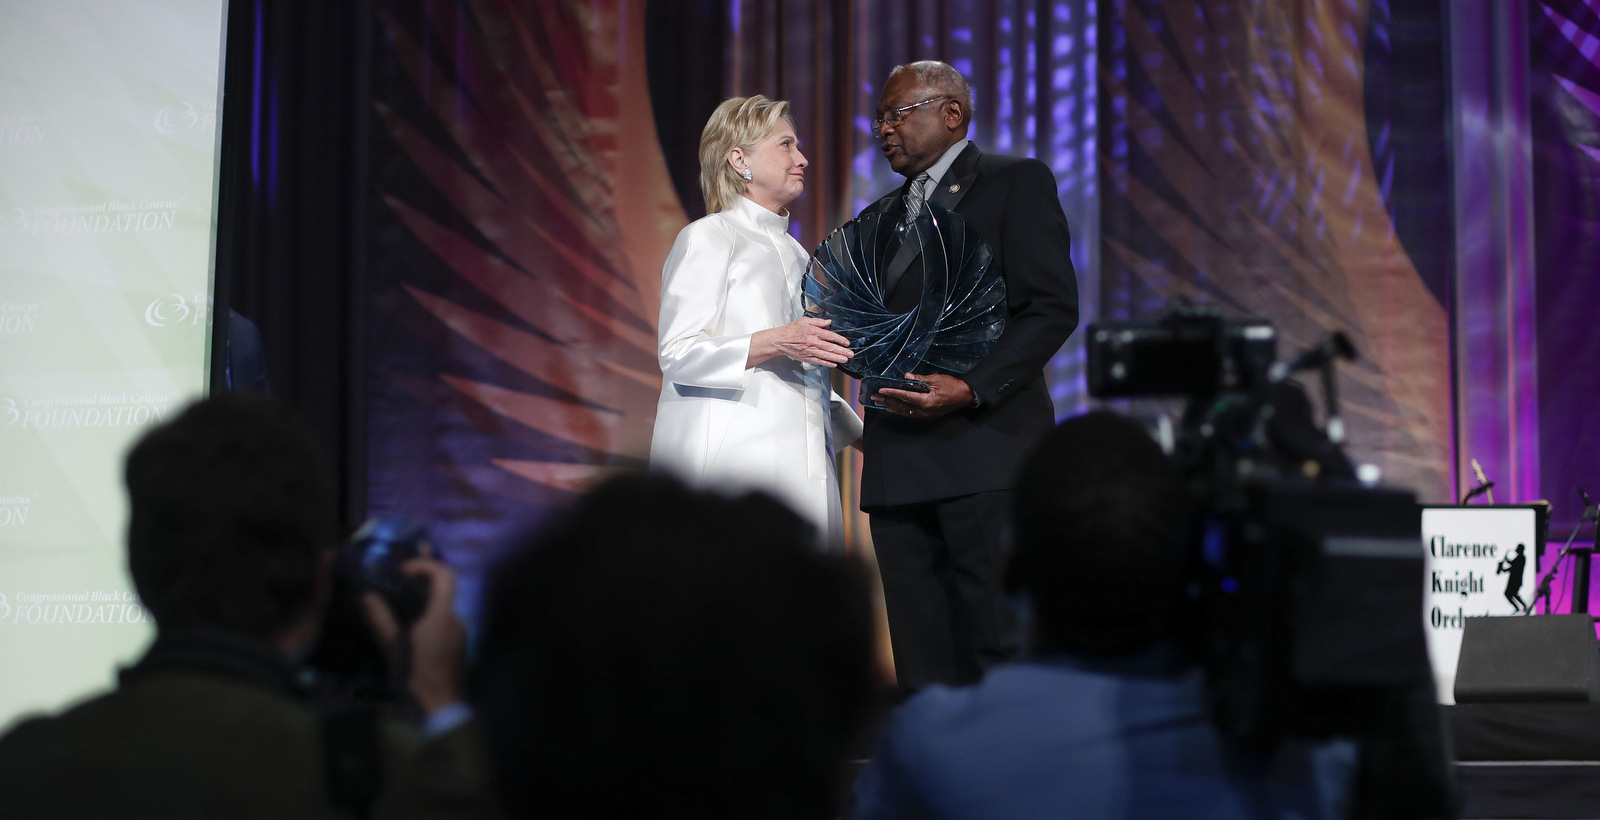 Democratic presidential candidate Hillary Clinton, left, accompanied by James Clyburn, D-S.C., right, receives the Phoenix award at the Congressional Black Caucus Foundation's Phoenix Awards Dinner at the Washington Convention center, in Washington, Saturday, Sept. 17, 2016. | AP